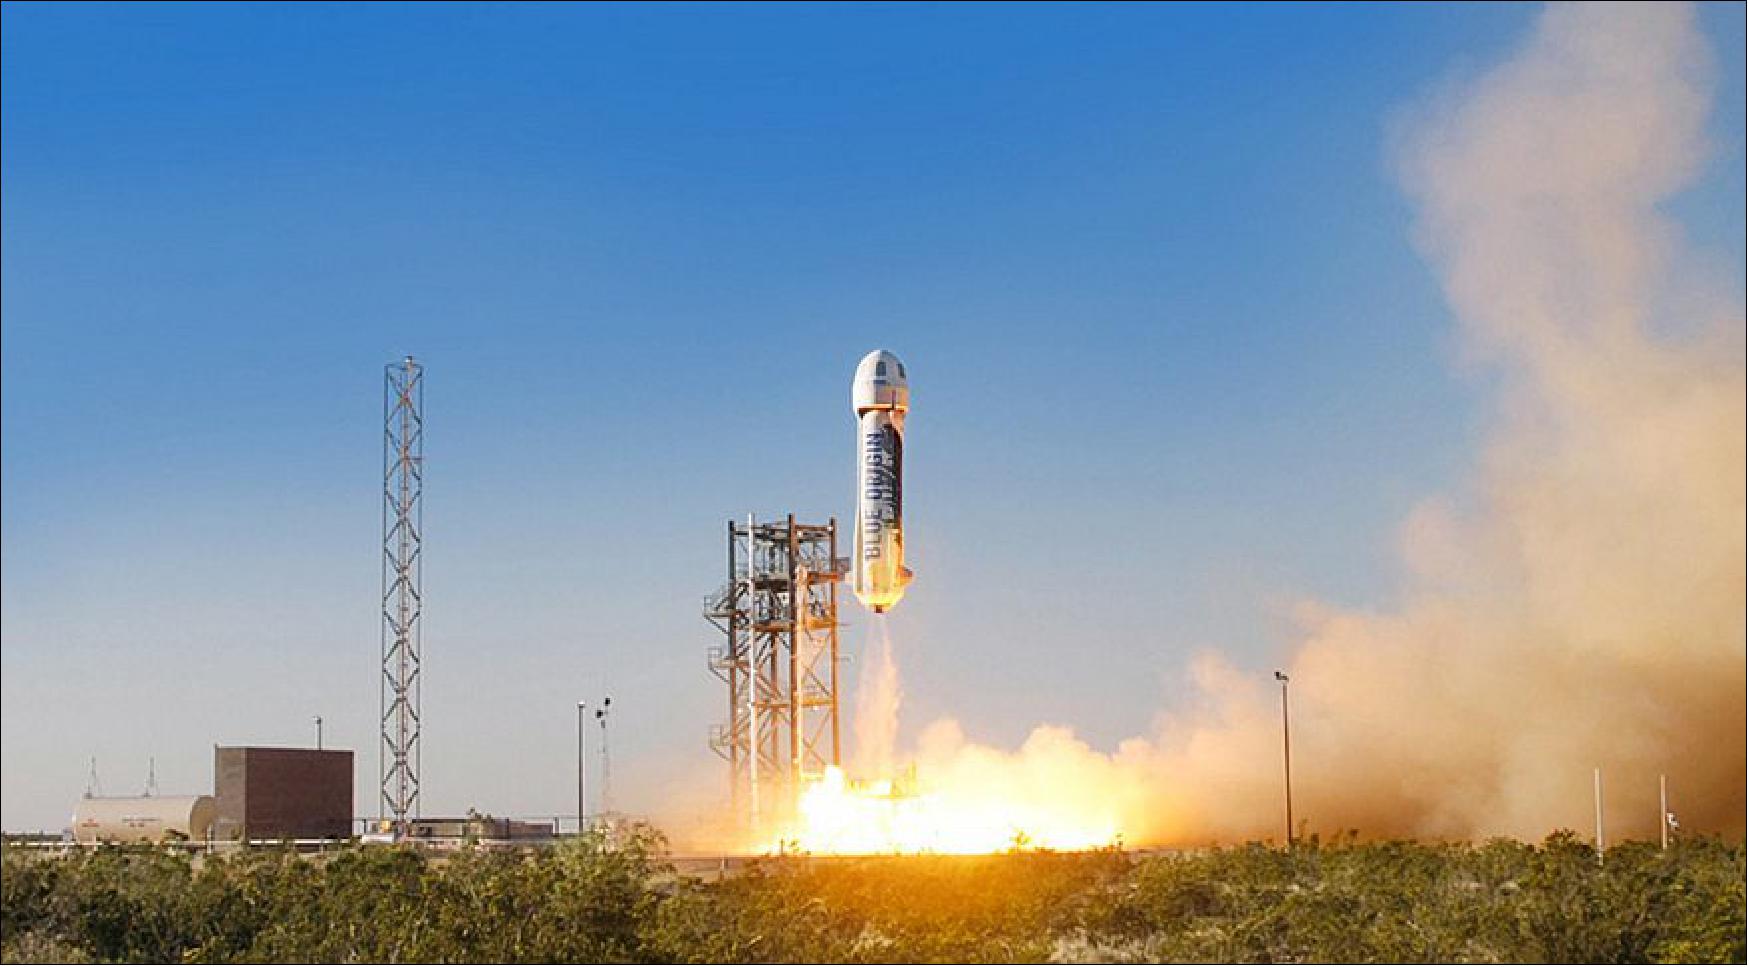 Figure 28: The New Shepard space vehicle blasts off on its first developmental test flight over Blue Origin’s West Texas Launch Site on April 29, 2015. The crew capsule reached an apogee at 93,600 meters before beginning its descent back to Earth (photo credit: Blue Origin)